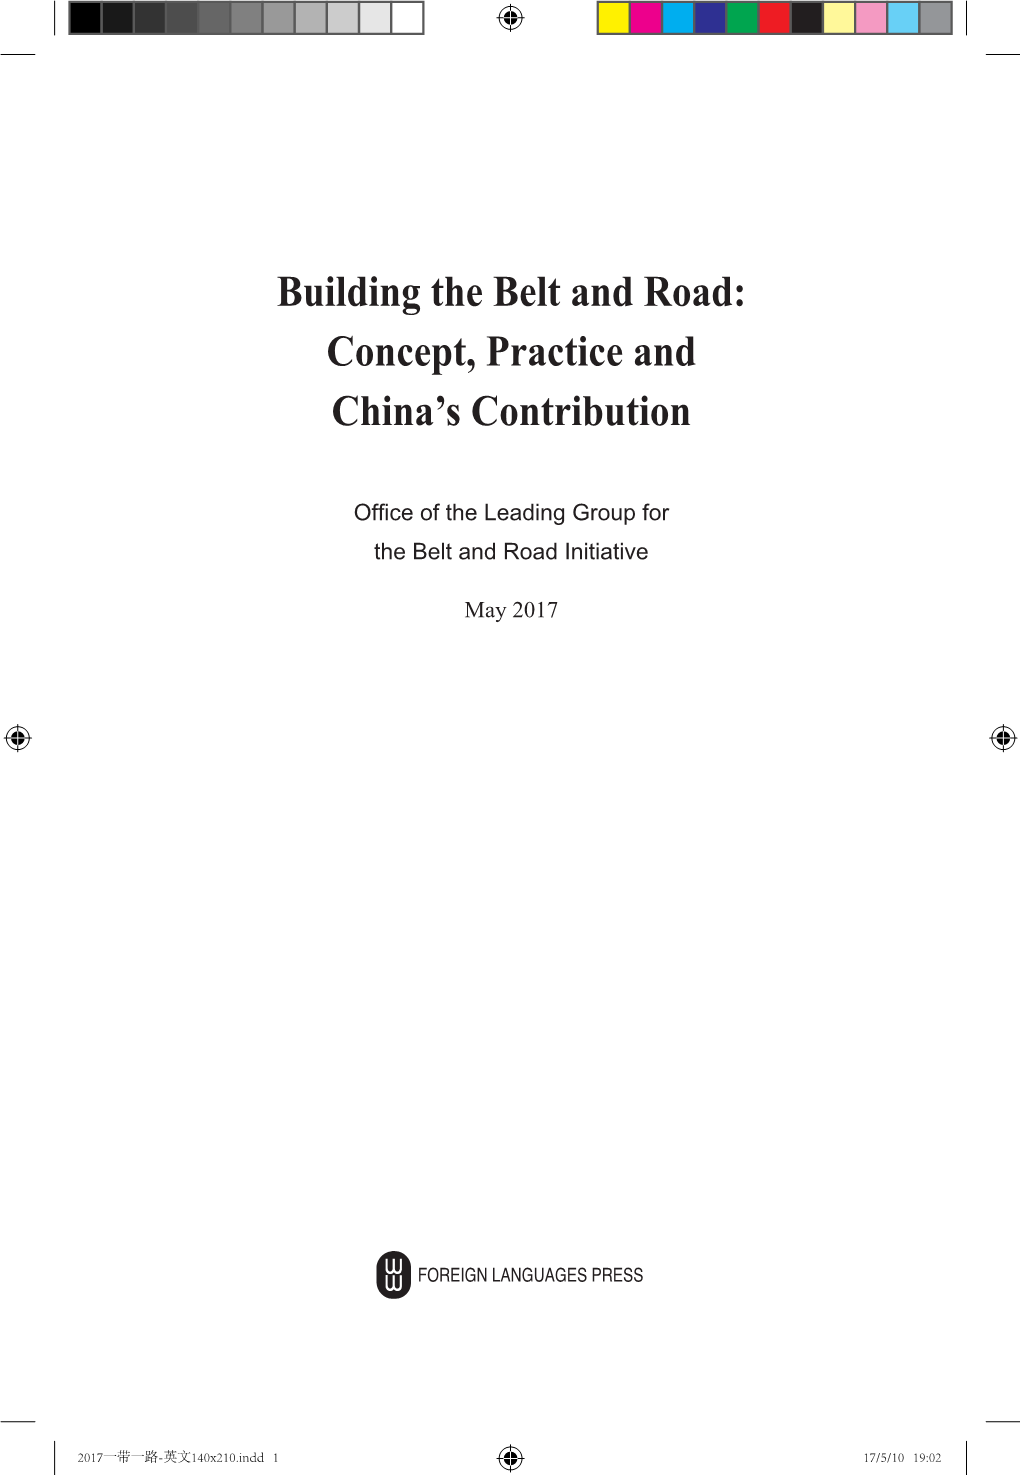 Building the Belt and Road: Concept, Practice and China’S Contribution